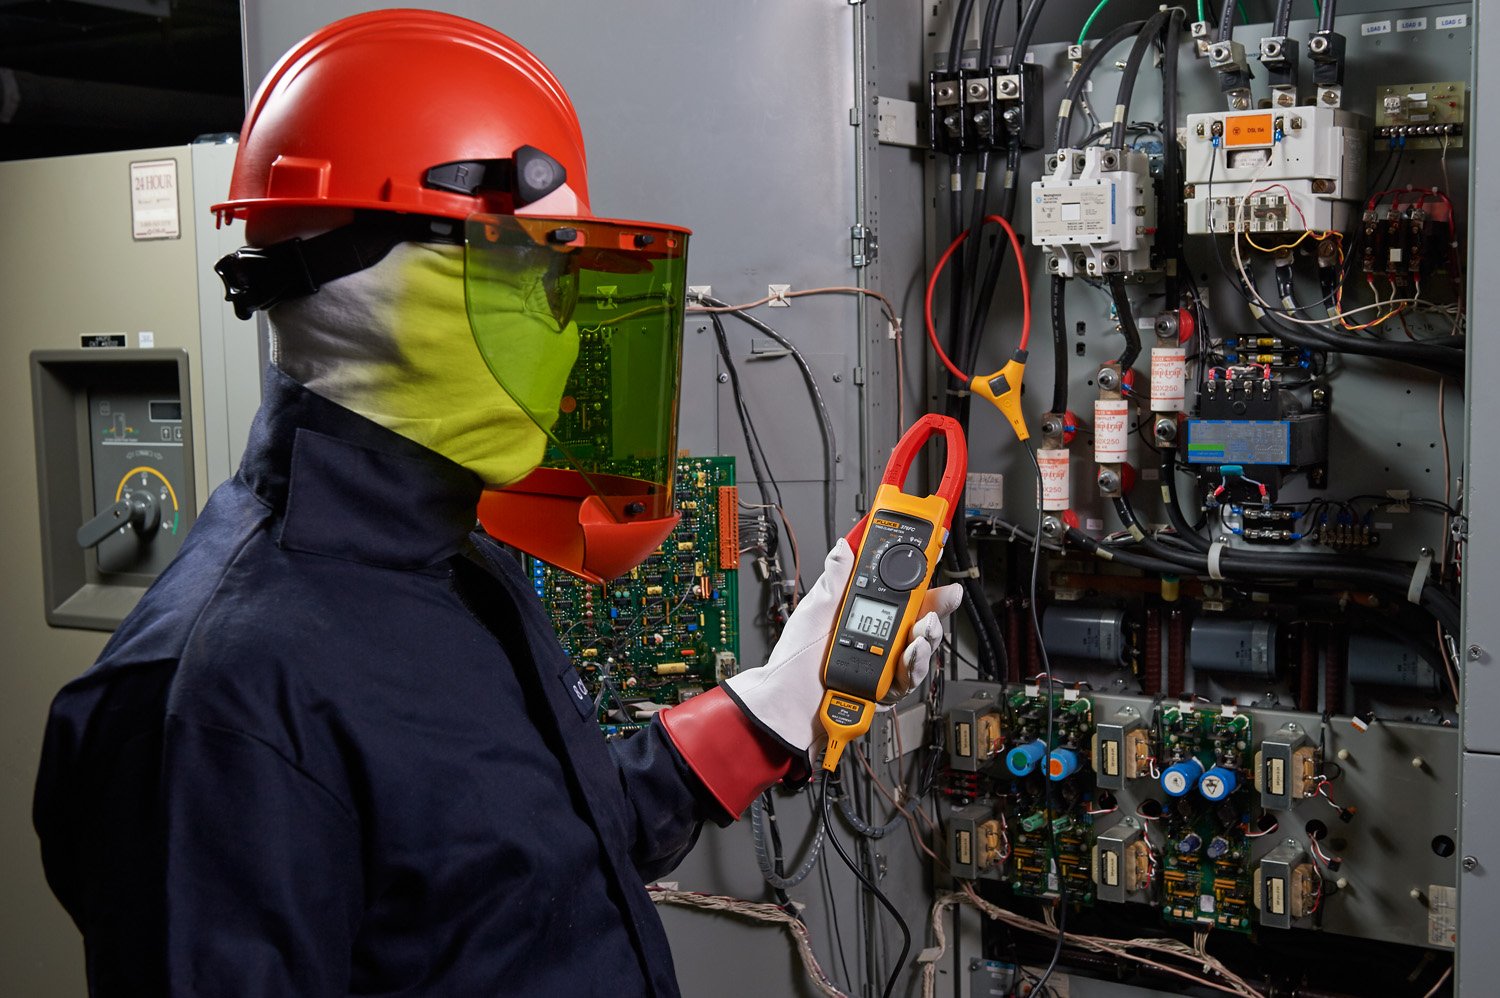 Different levels of PPE are required for different types of electrical work.